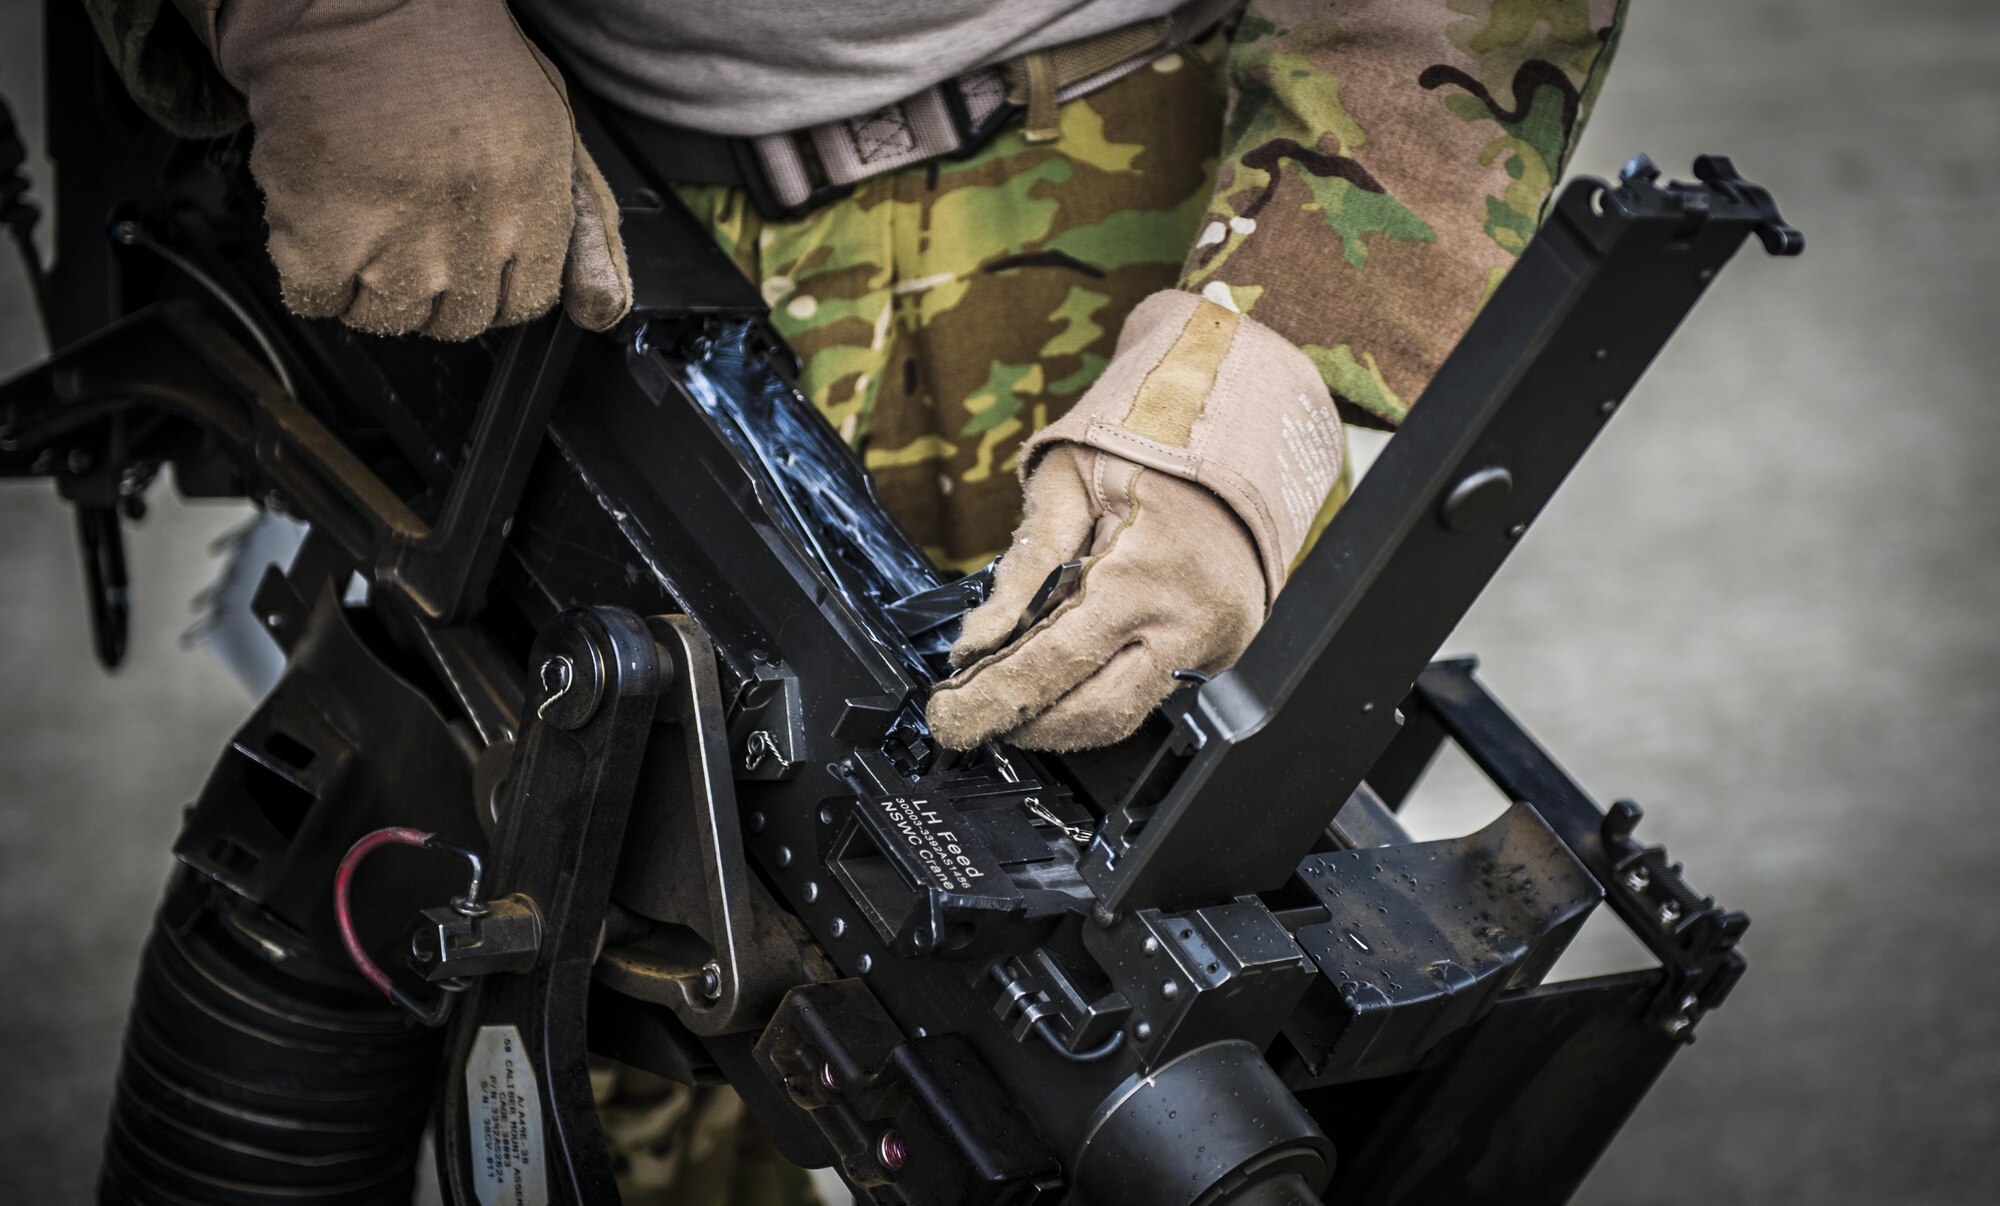 A flight engineer with the 8th Special Operations Squadron checks the bolt of a .50-caliber machine gun at Hurlburt Field, Fla., Nov. 8, 2016. The .50-caliber machine gun weighs more than 80 pounds and is capable of firing up to 850 rounds per minute with a maximum range of approximately 7,400 yards. (U.S. Air Force photo by Airman 1st Class Joseph Pick)